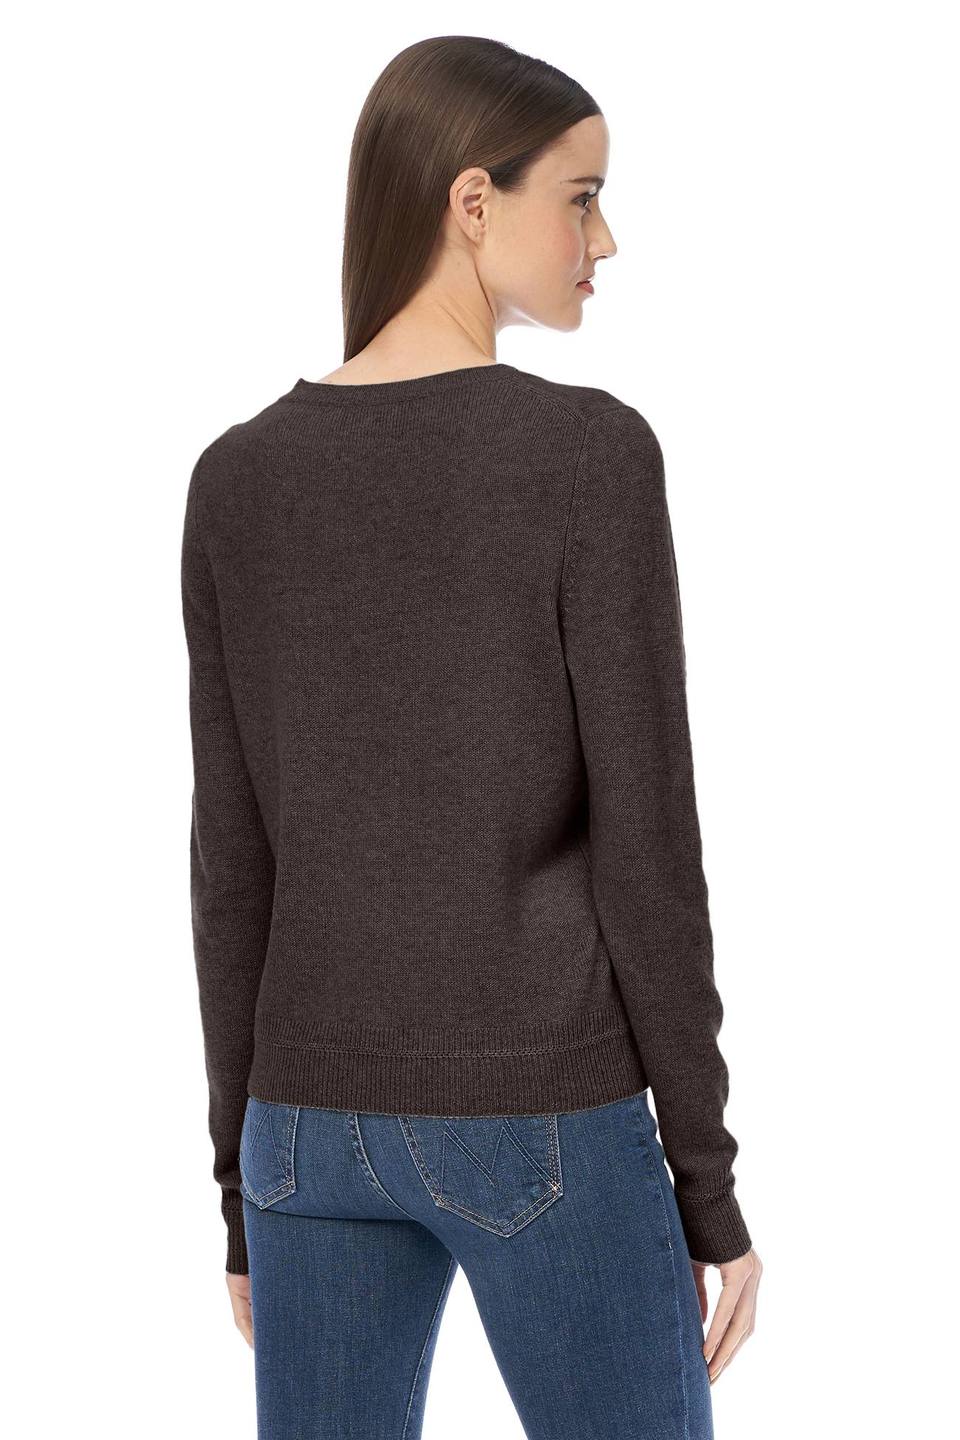 LEILA SWEATER - Kingfisher Road - Online Boutique